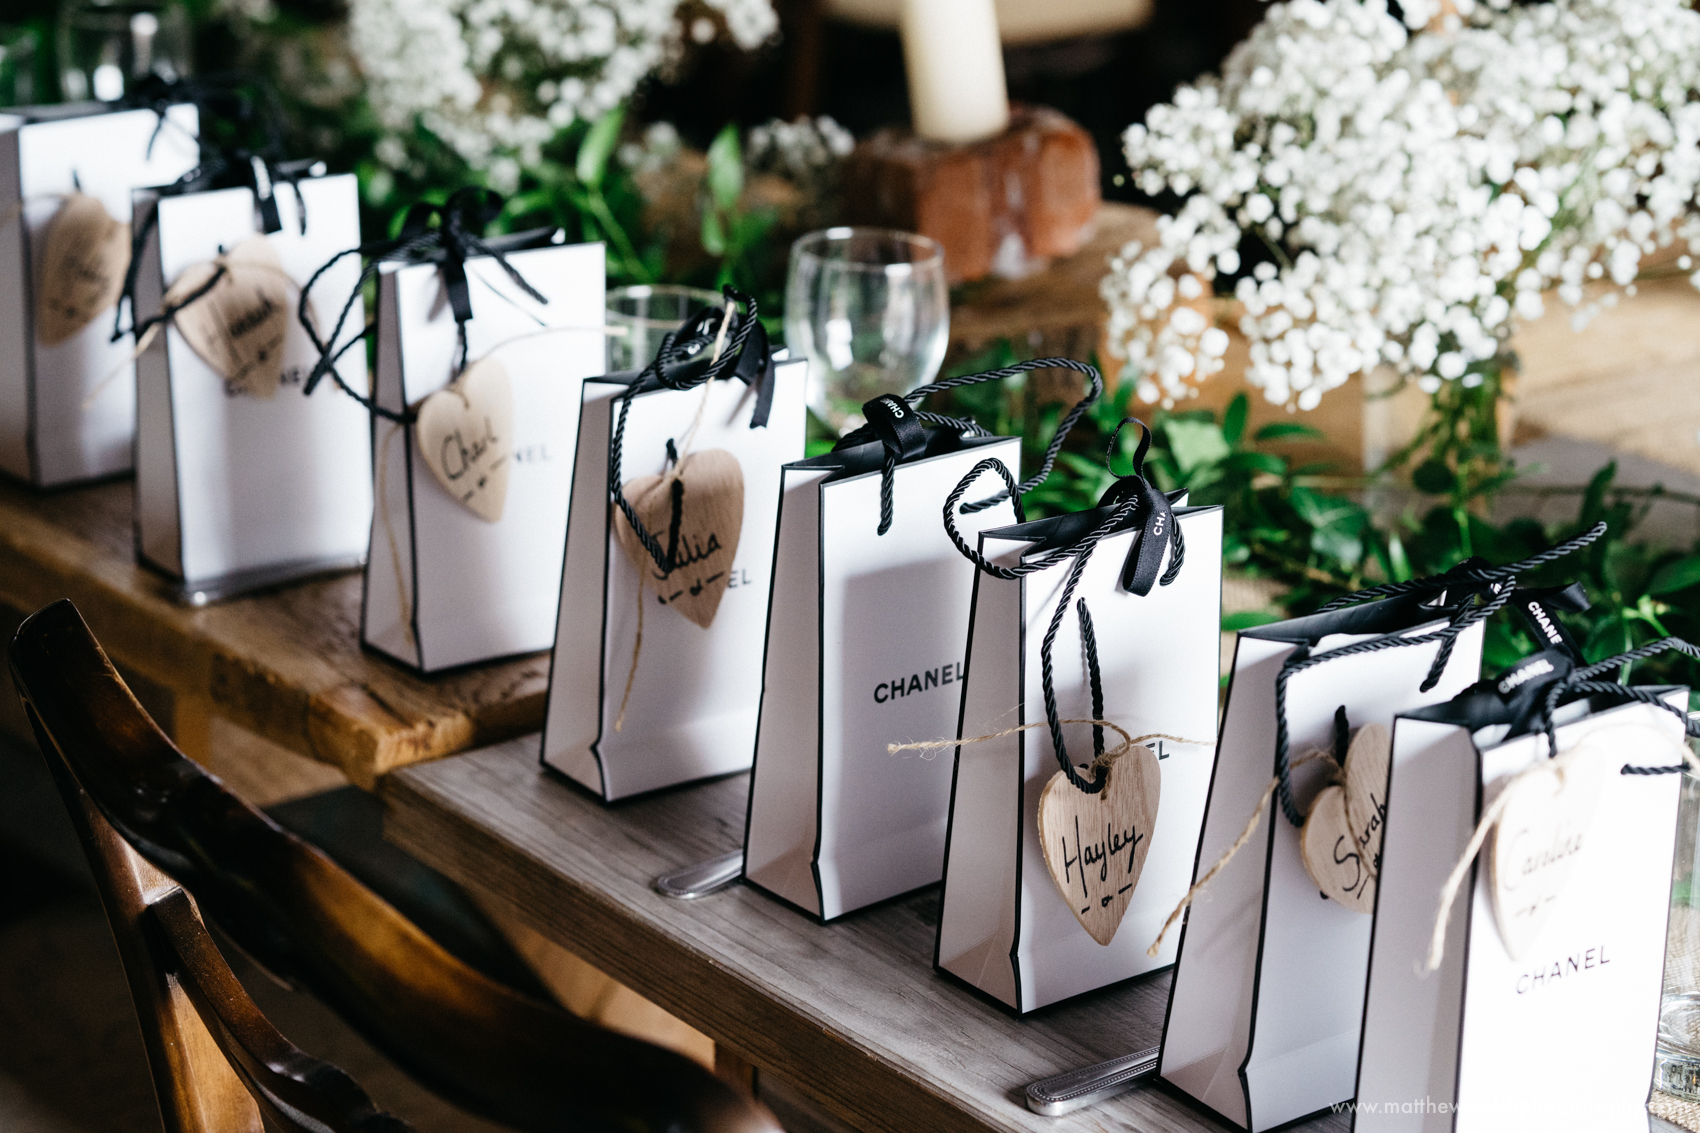 Gifts for the bridesmaids